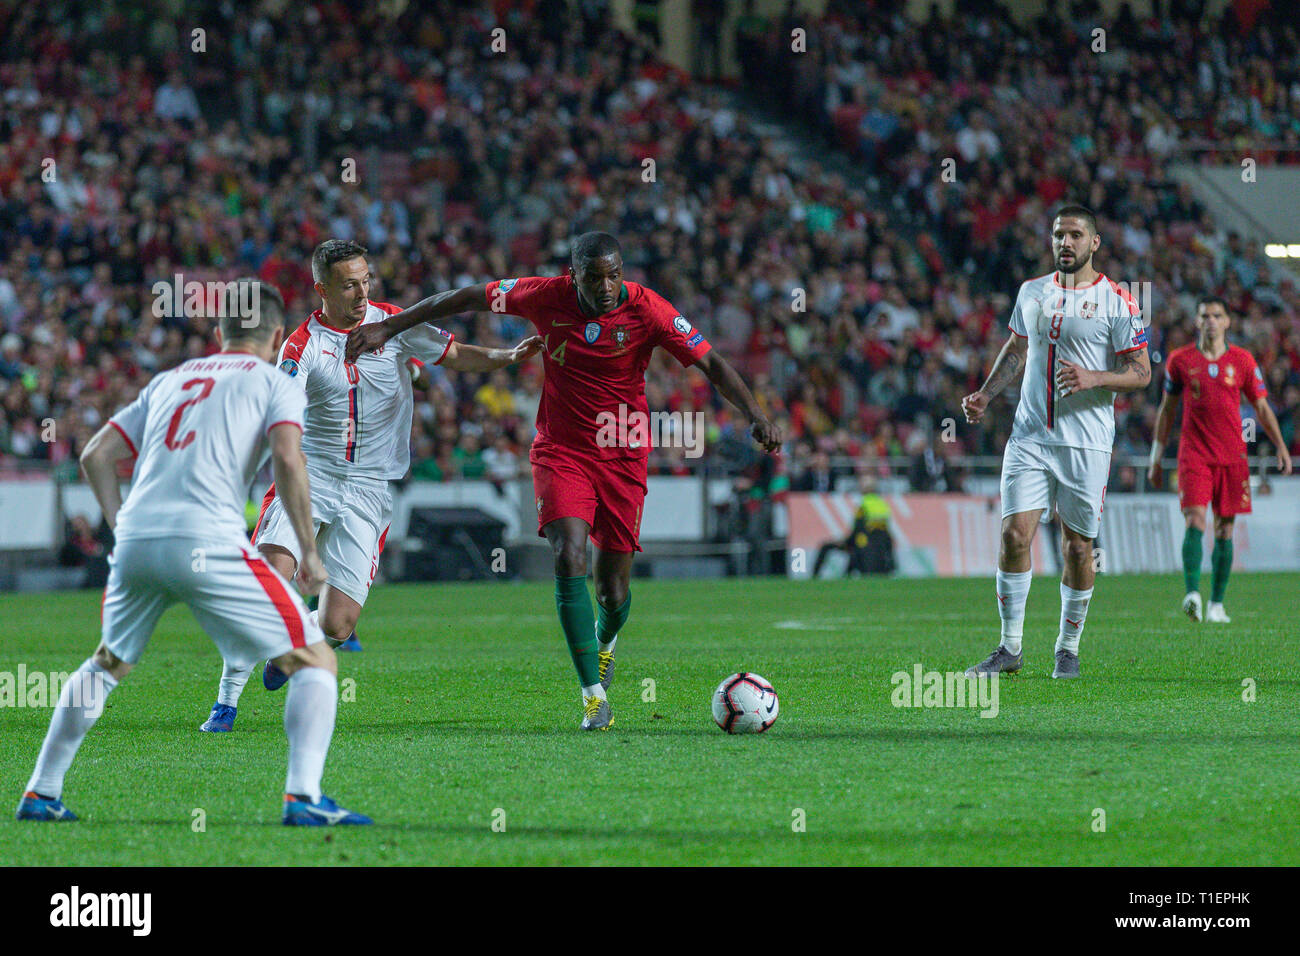 Lisbon, Portugal. 25th Mar, 2019. March 25, 2019. Lisbon, Portugal. Portugal's and Betis midfielder William Carvalho (14) during the European Championship 2020 Qualifying Round between Portugal and Serbia Credit: Alexandre de Sousa/Alamy Live News Stock Photo